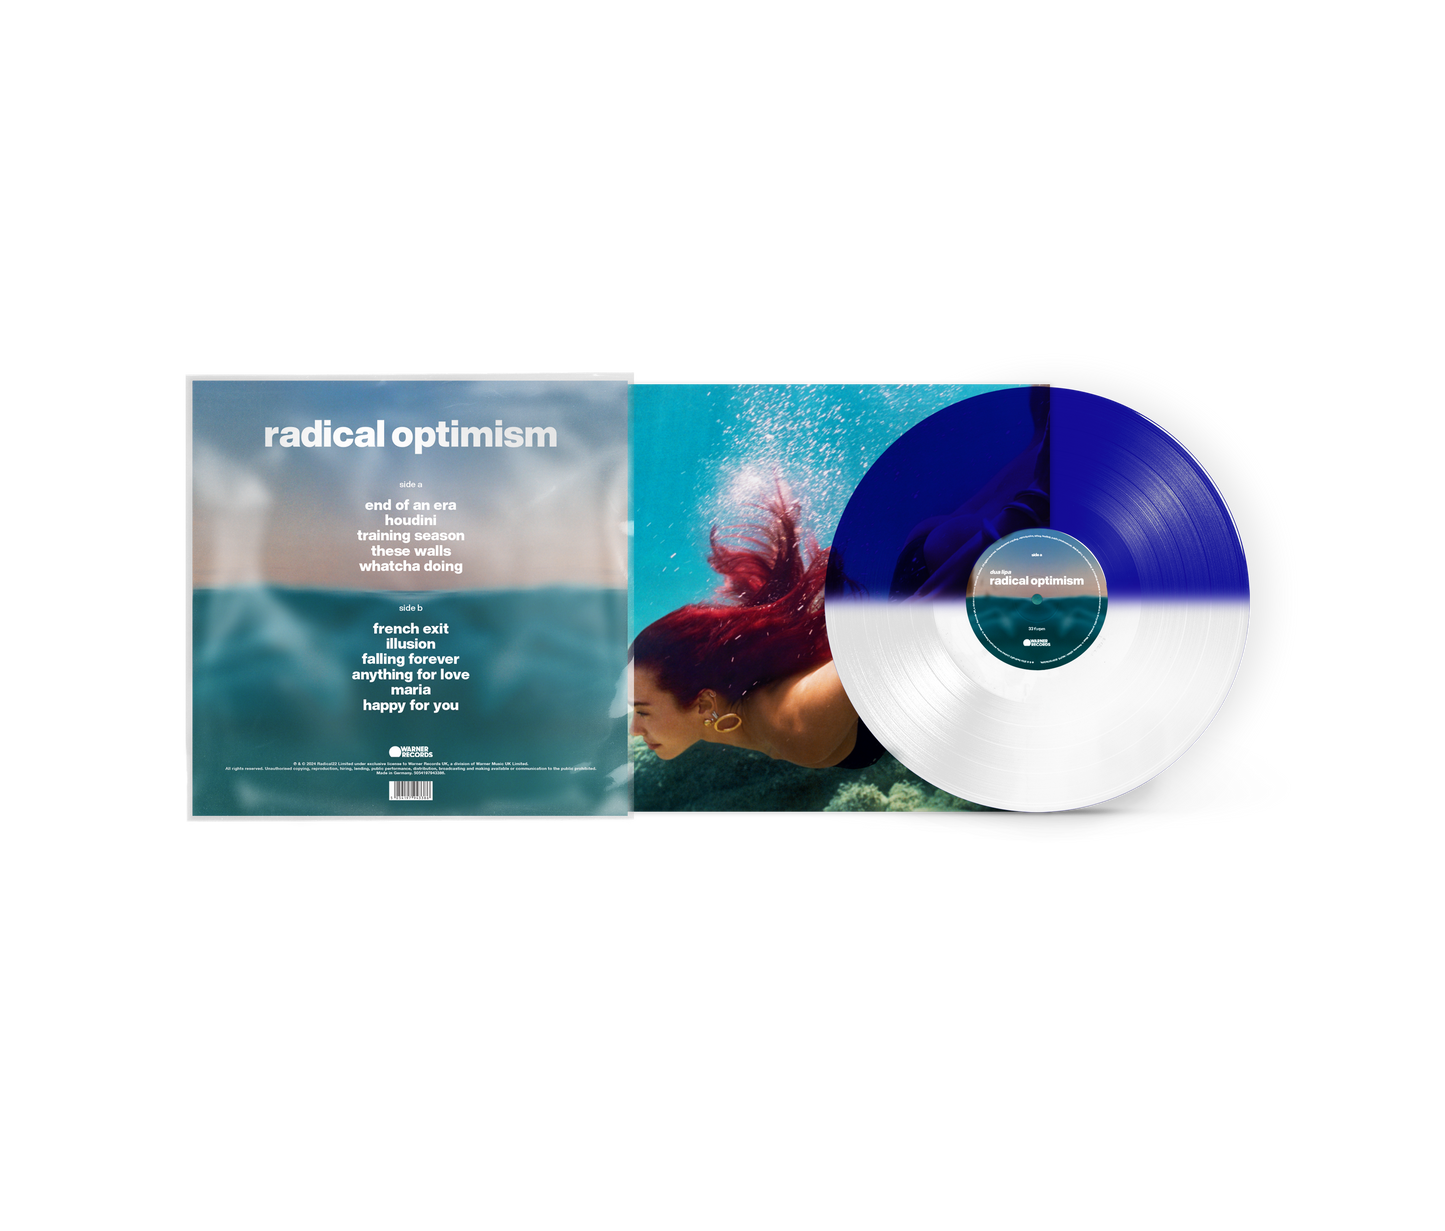 radical optimism exclusive deluxe vinyl (signed art card included)